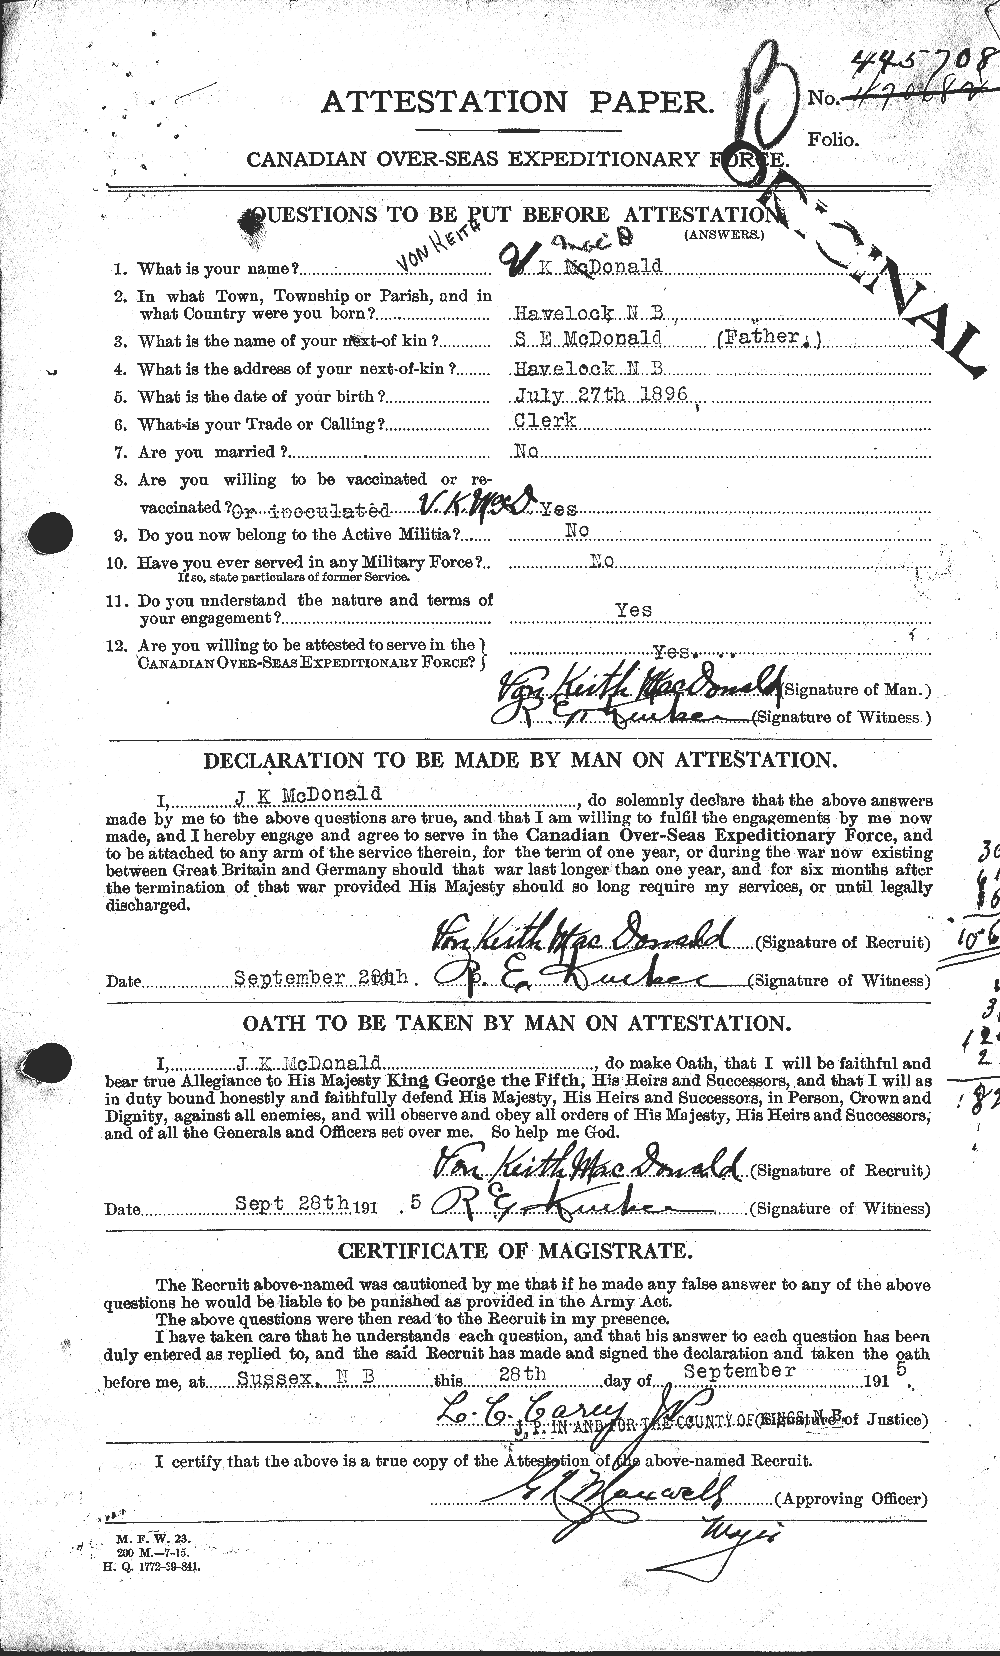 Personnel Records of the First World War - CEF 519902a